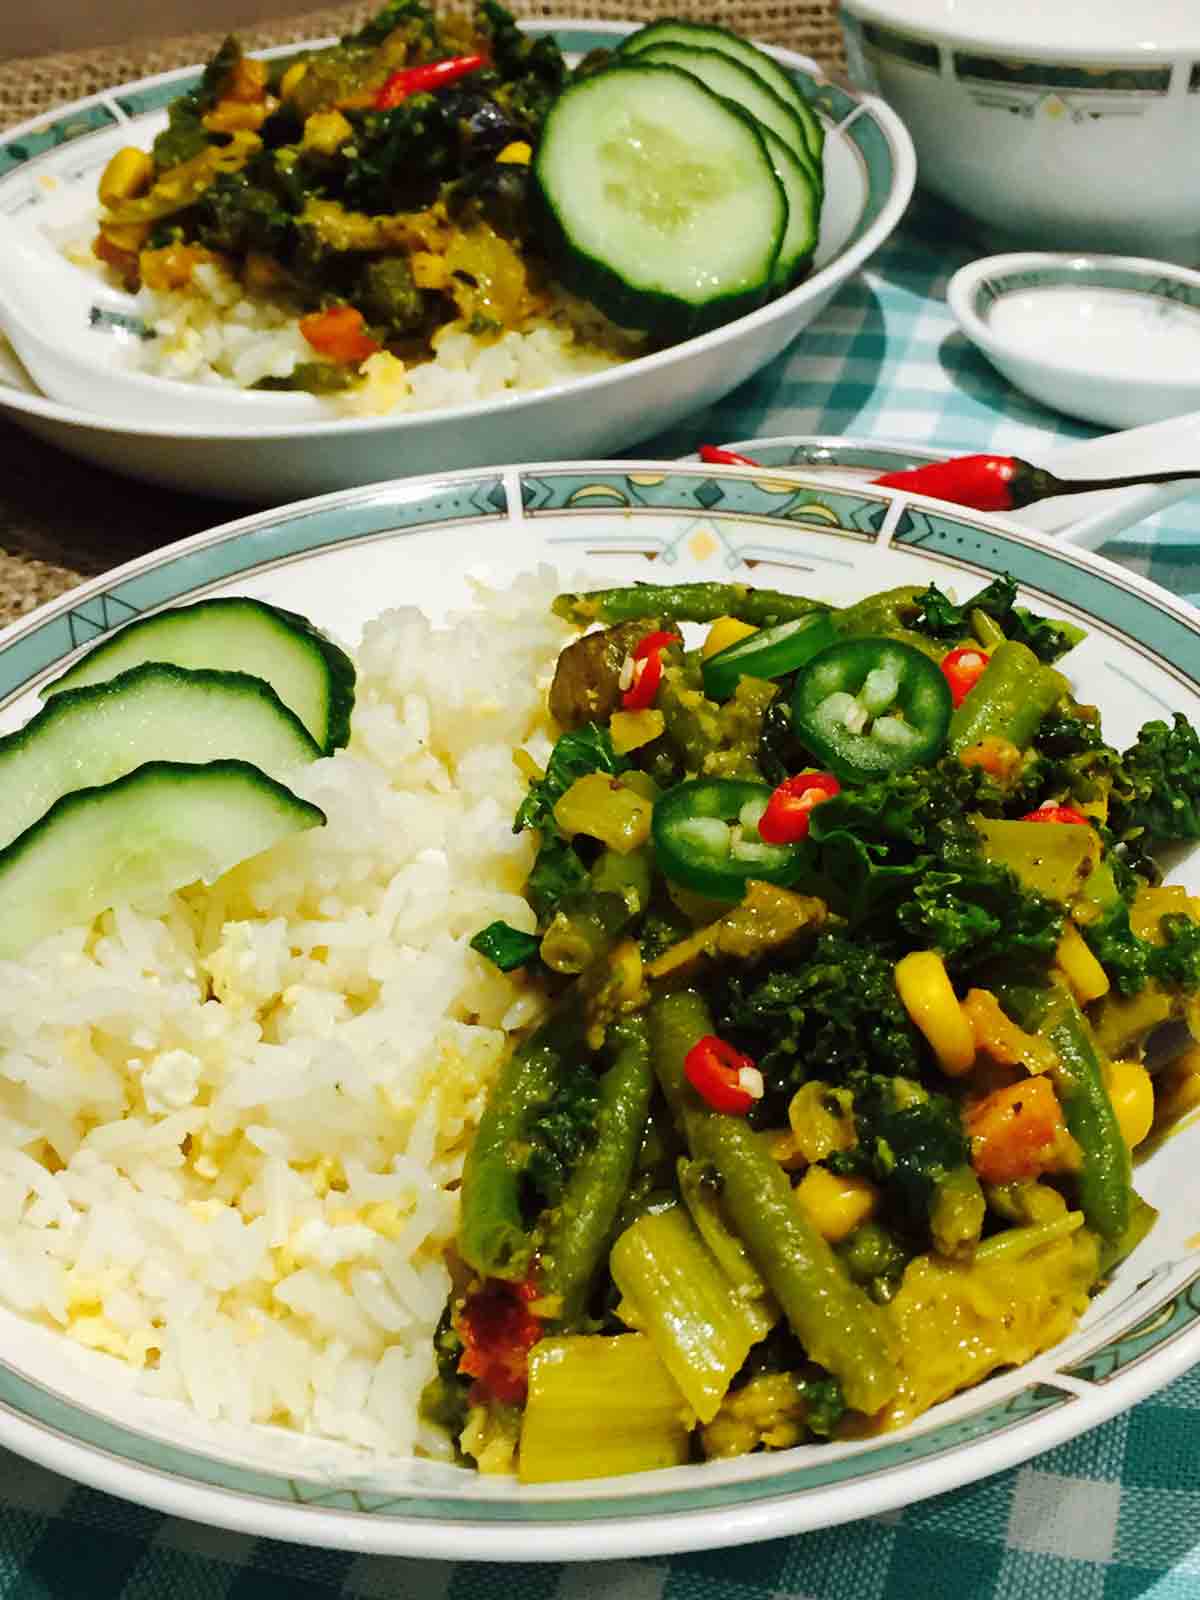 A white plate of scrumptious vegetarian curry, together with egg-fried rice and other veggies.